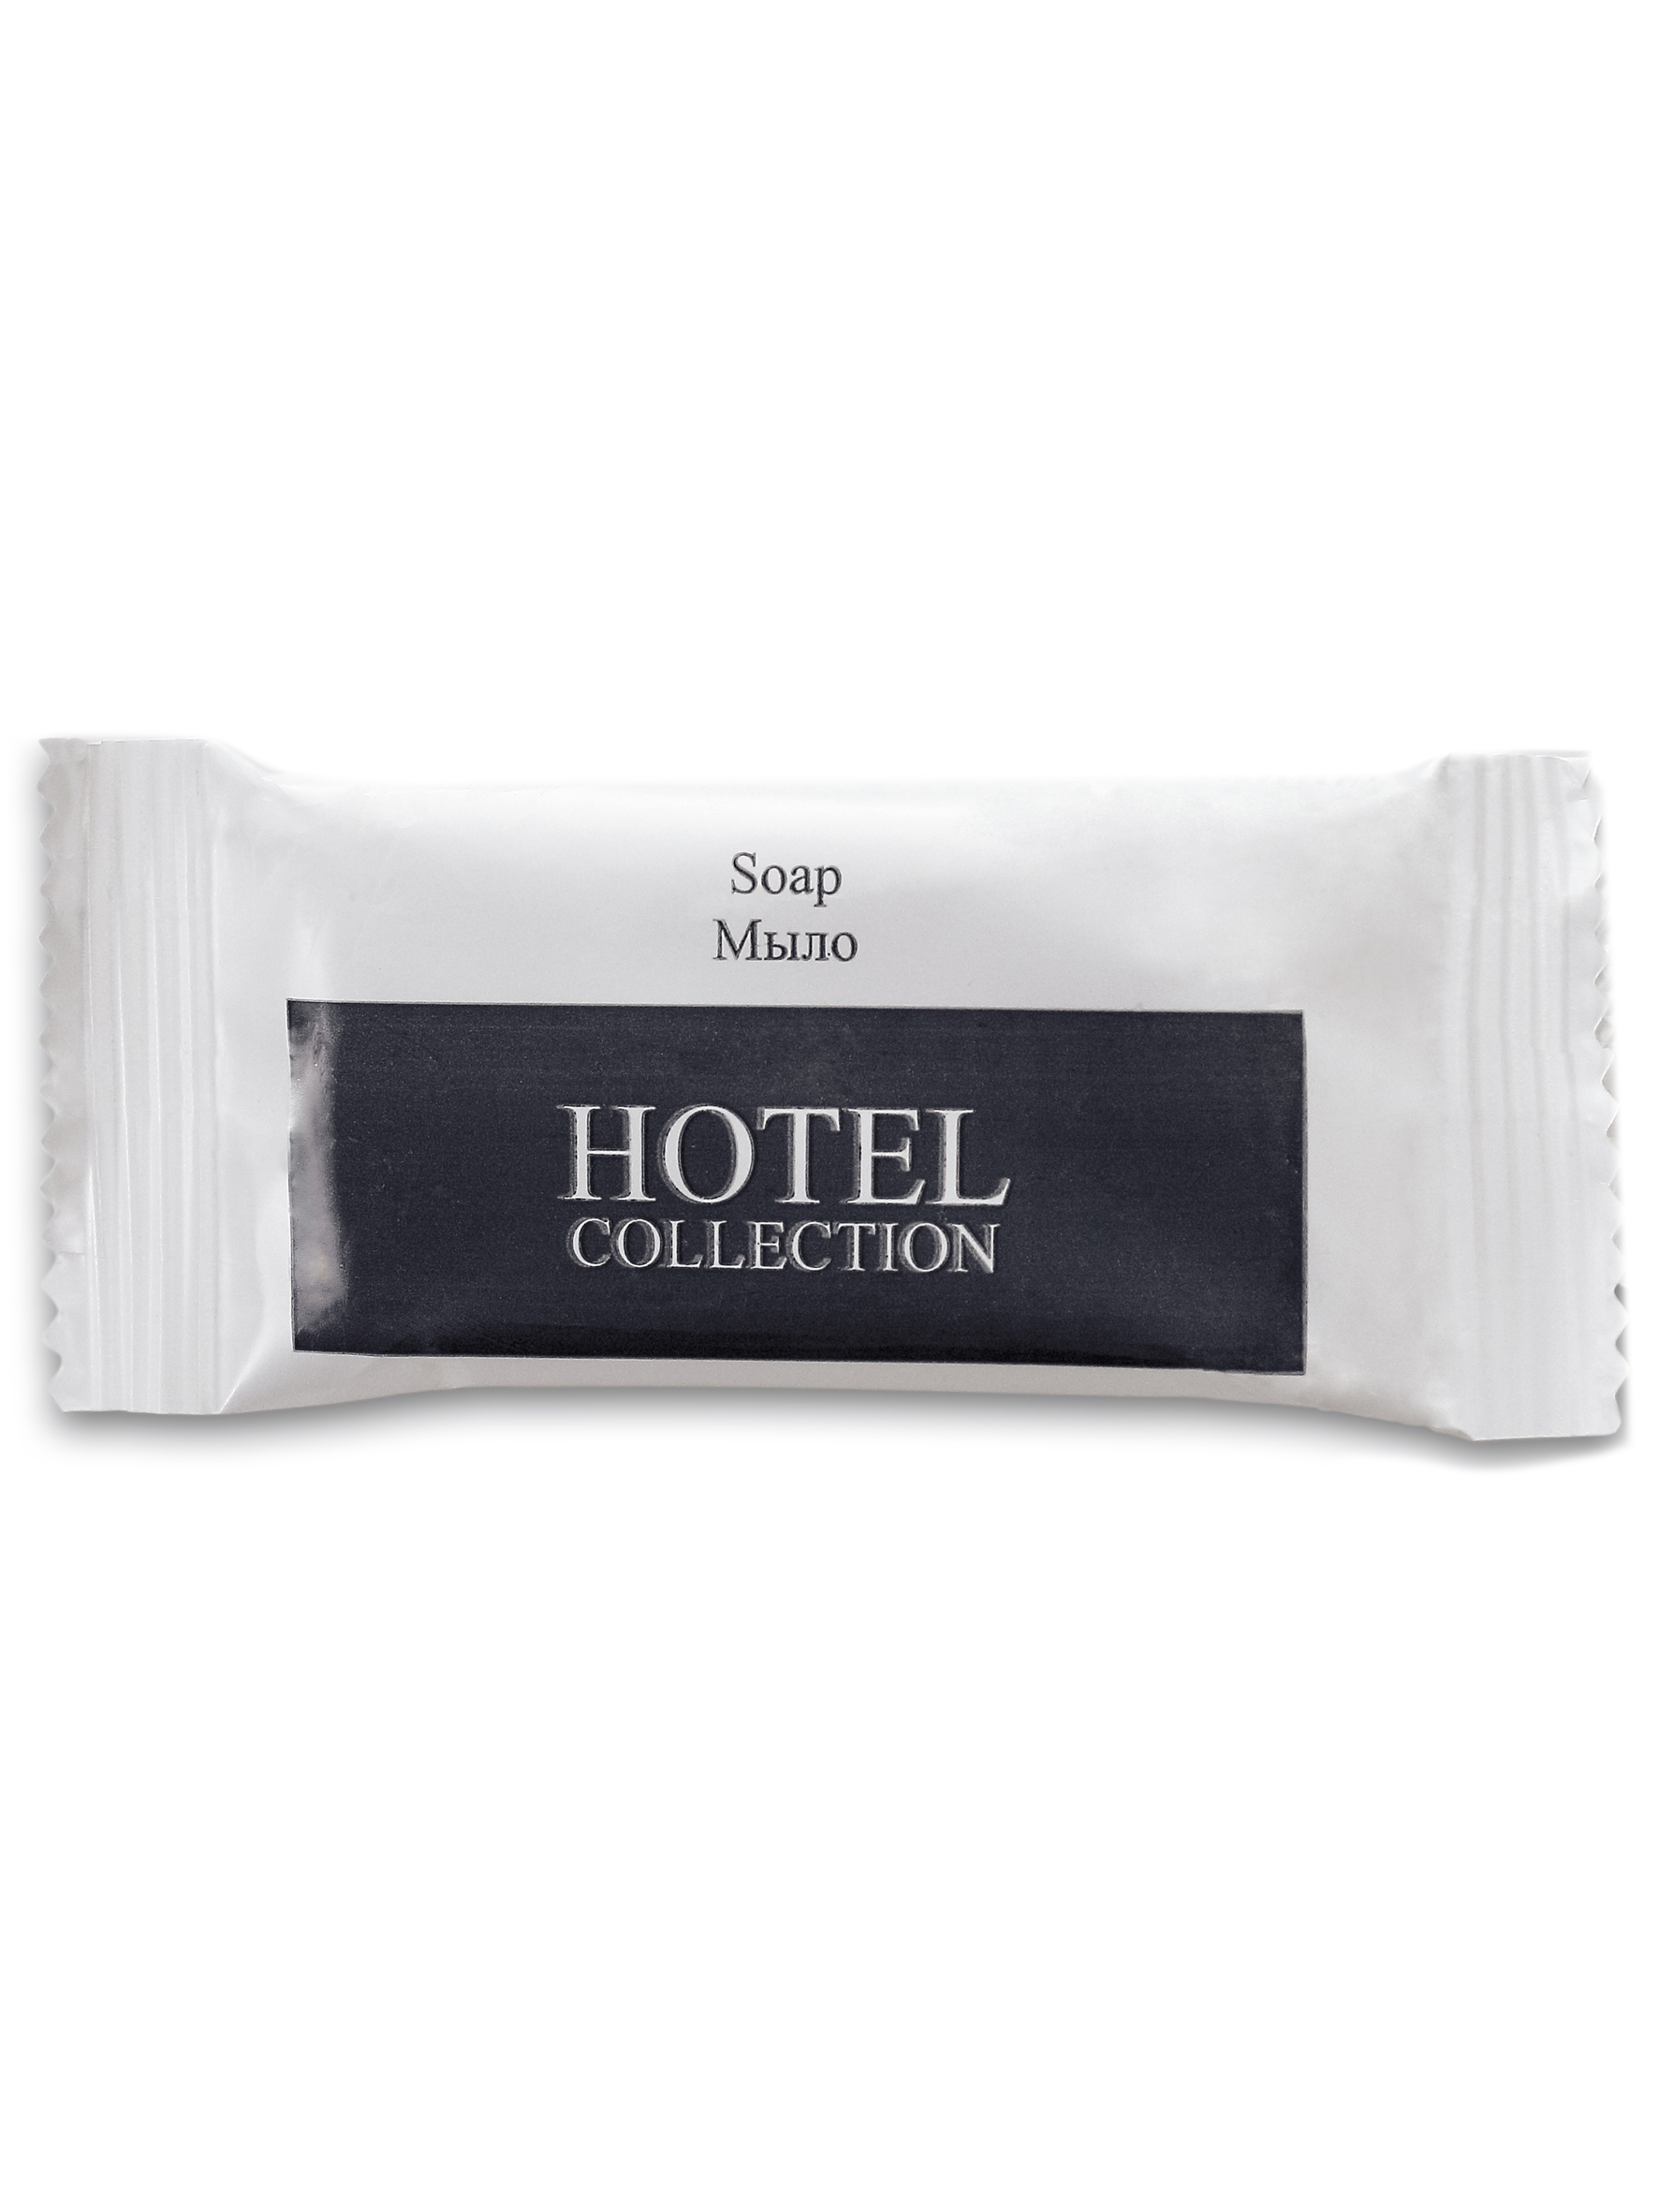 Мыло HOTEL COLLECTION